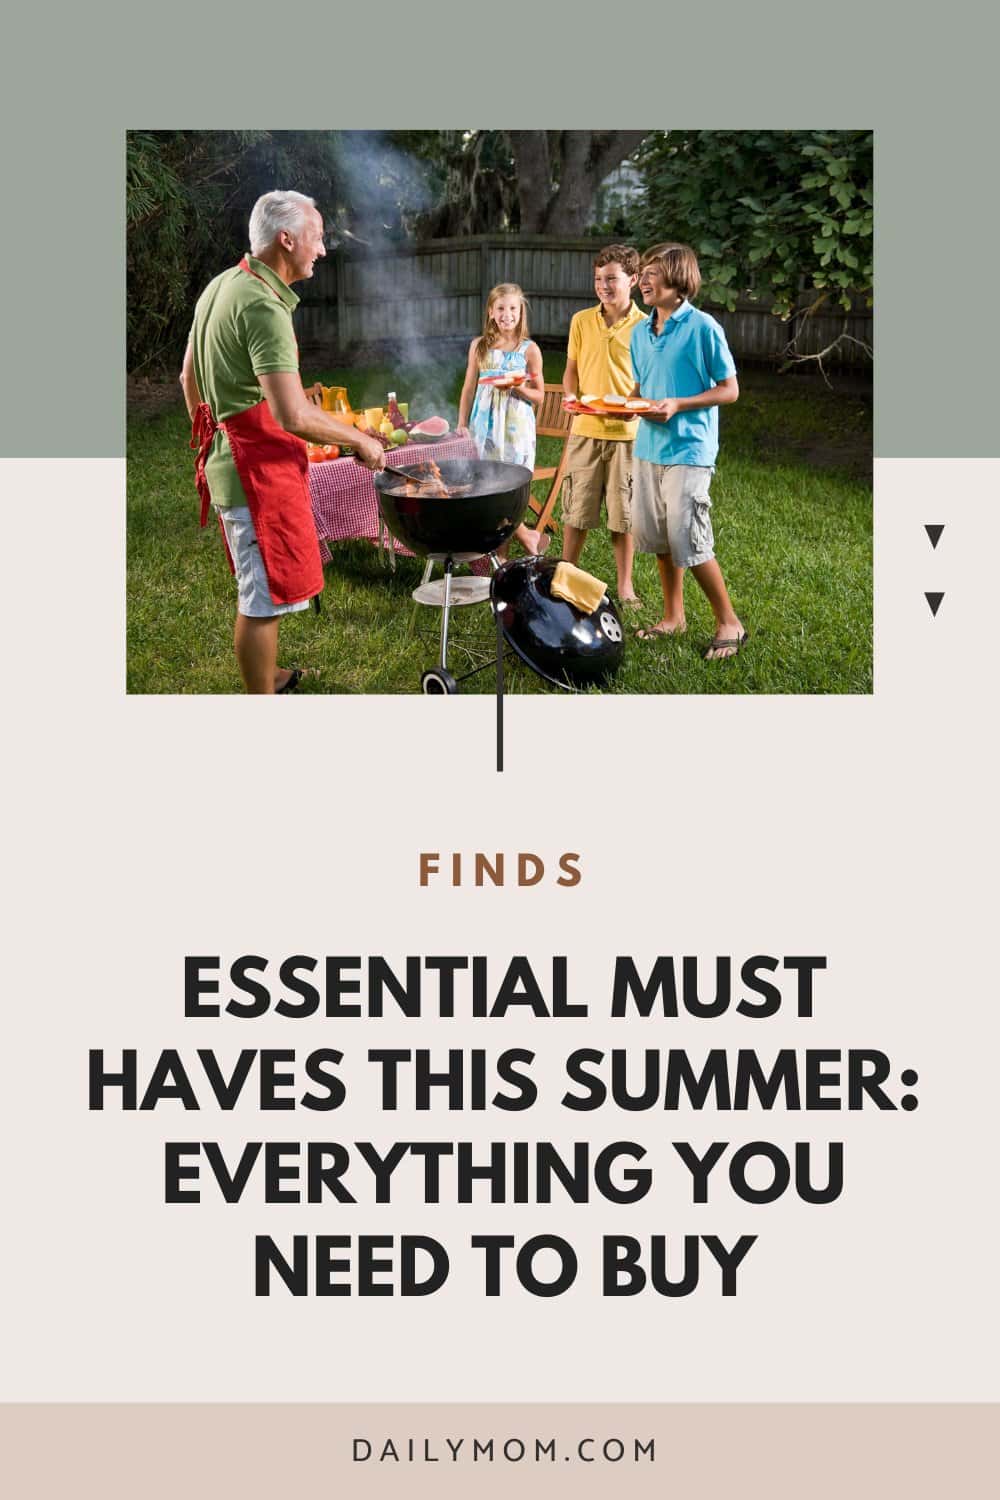 Essential Must Haves This Summer: Everything You Need To Make The Most Of The Sunny Days Outdoors 117 Daily Mom, Magazine For Families